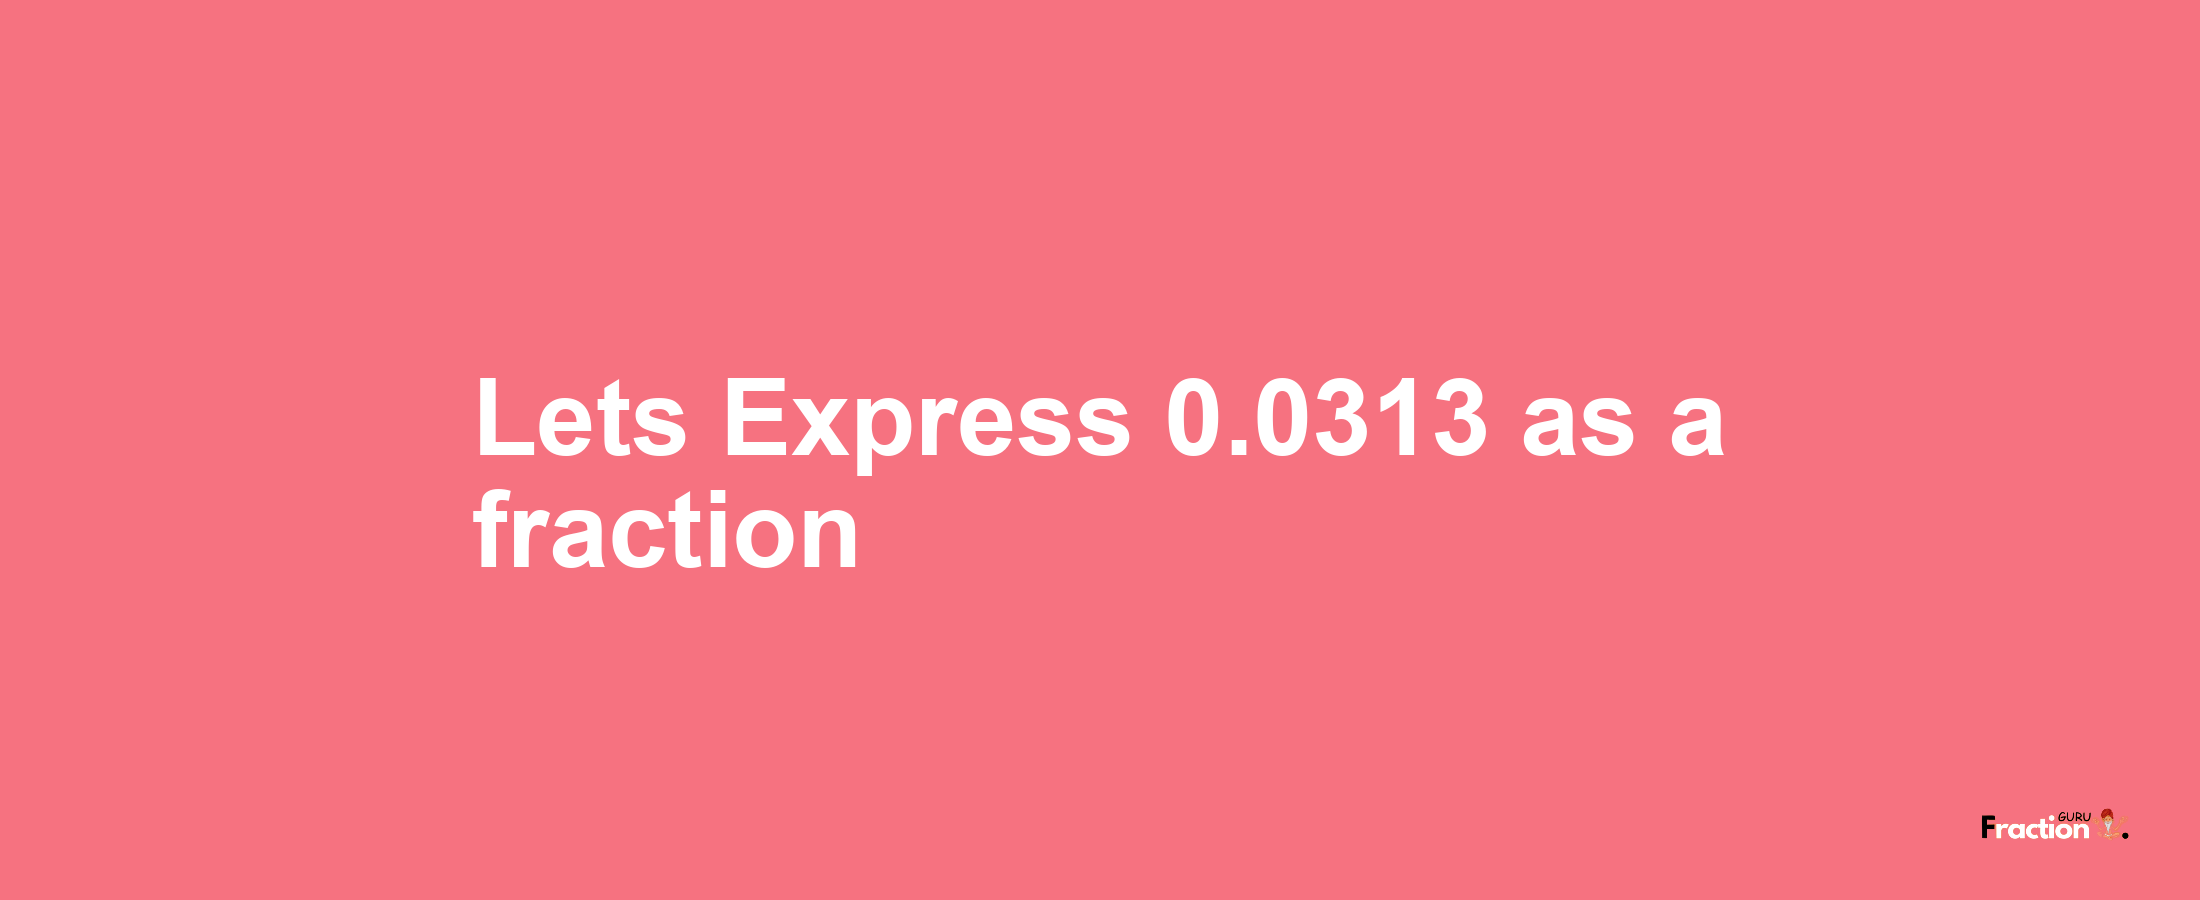 Lets Express 0.0313 as afraction